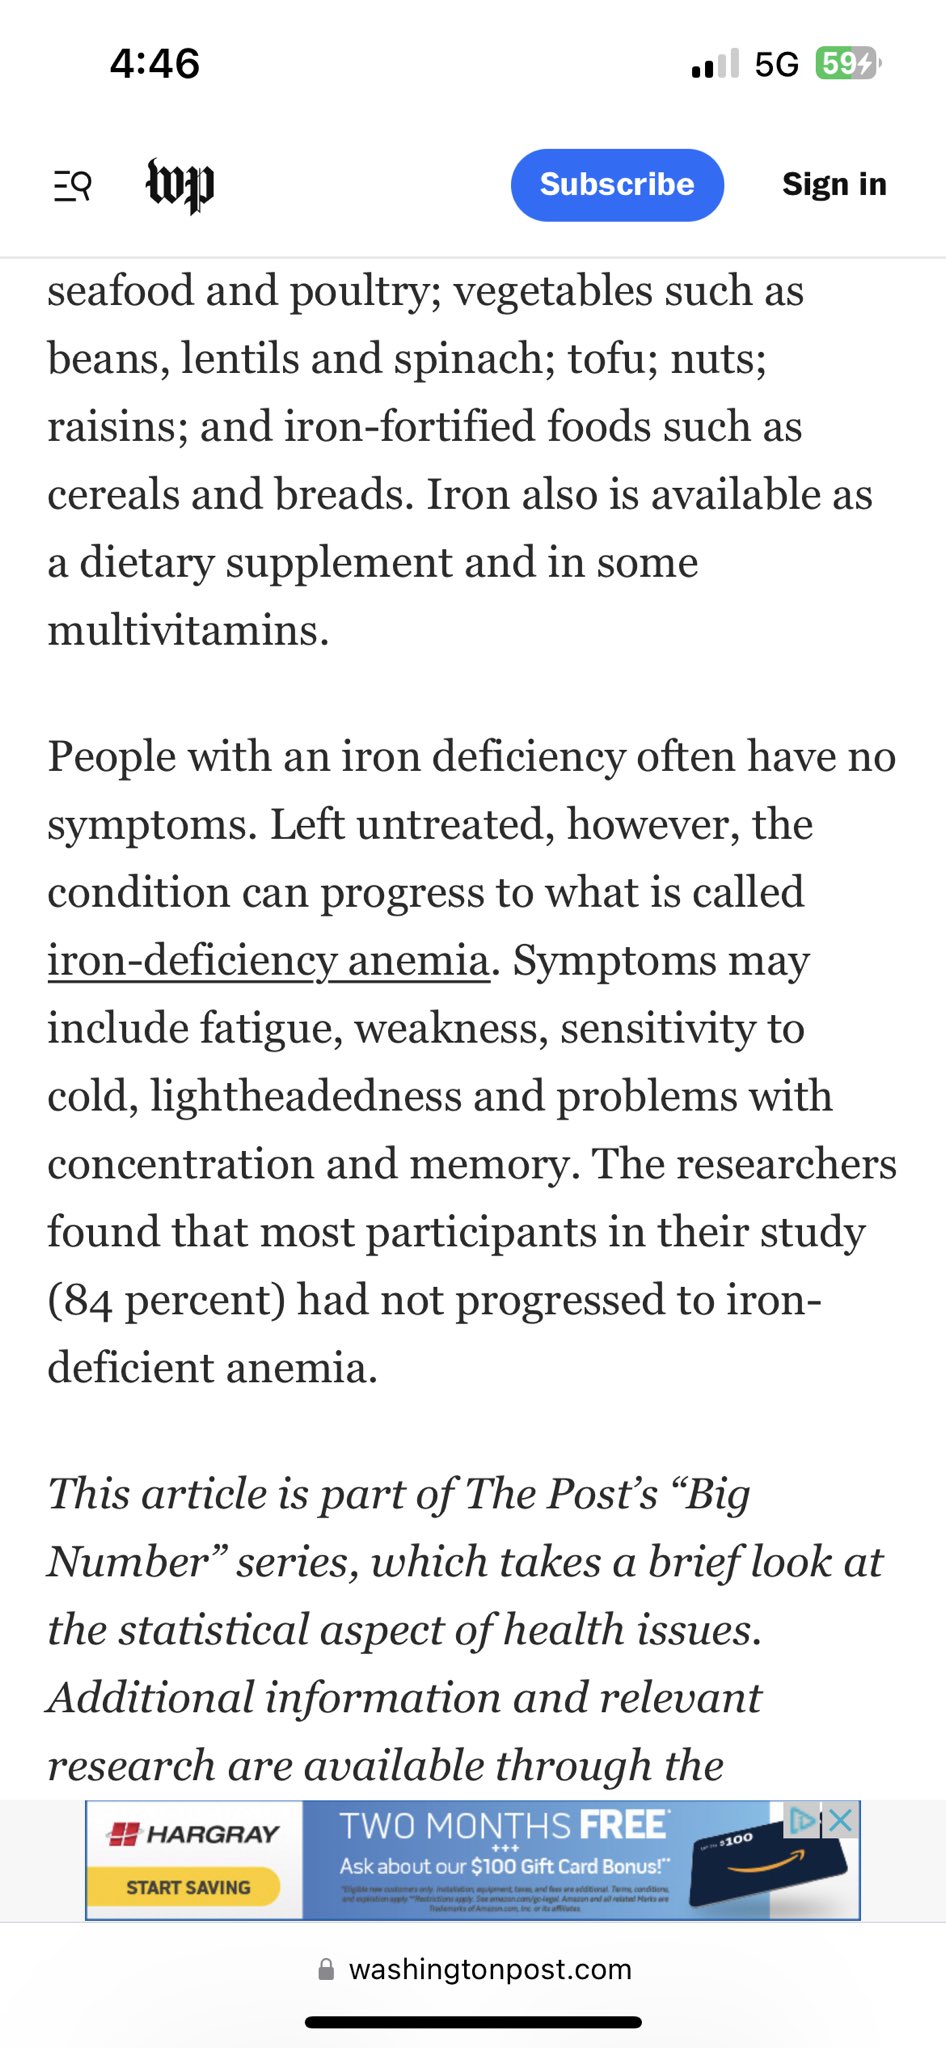 Shematologist, MD on X: Actually @washingtonpost, patients w/ iron  deficiency often have symptoms in the absence of anemia including 🩸sleep  disorders like restless legs 🩸hair loss 🩸brittle nails 🩸cold extremities  🩸fatigue 🩸headache/brain